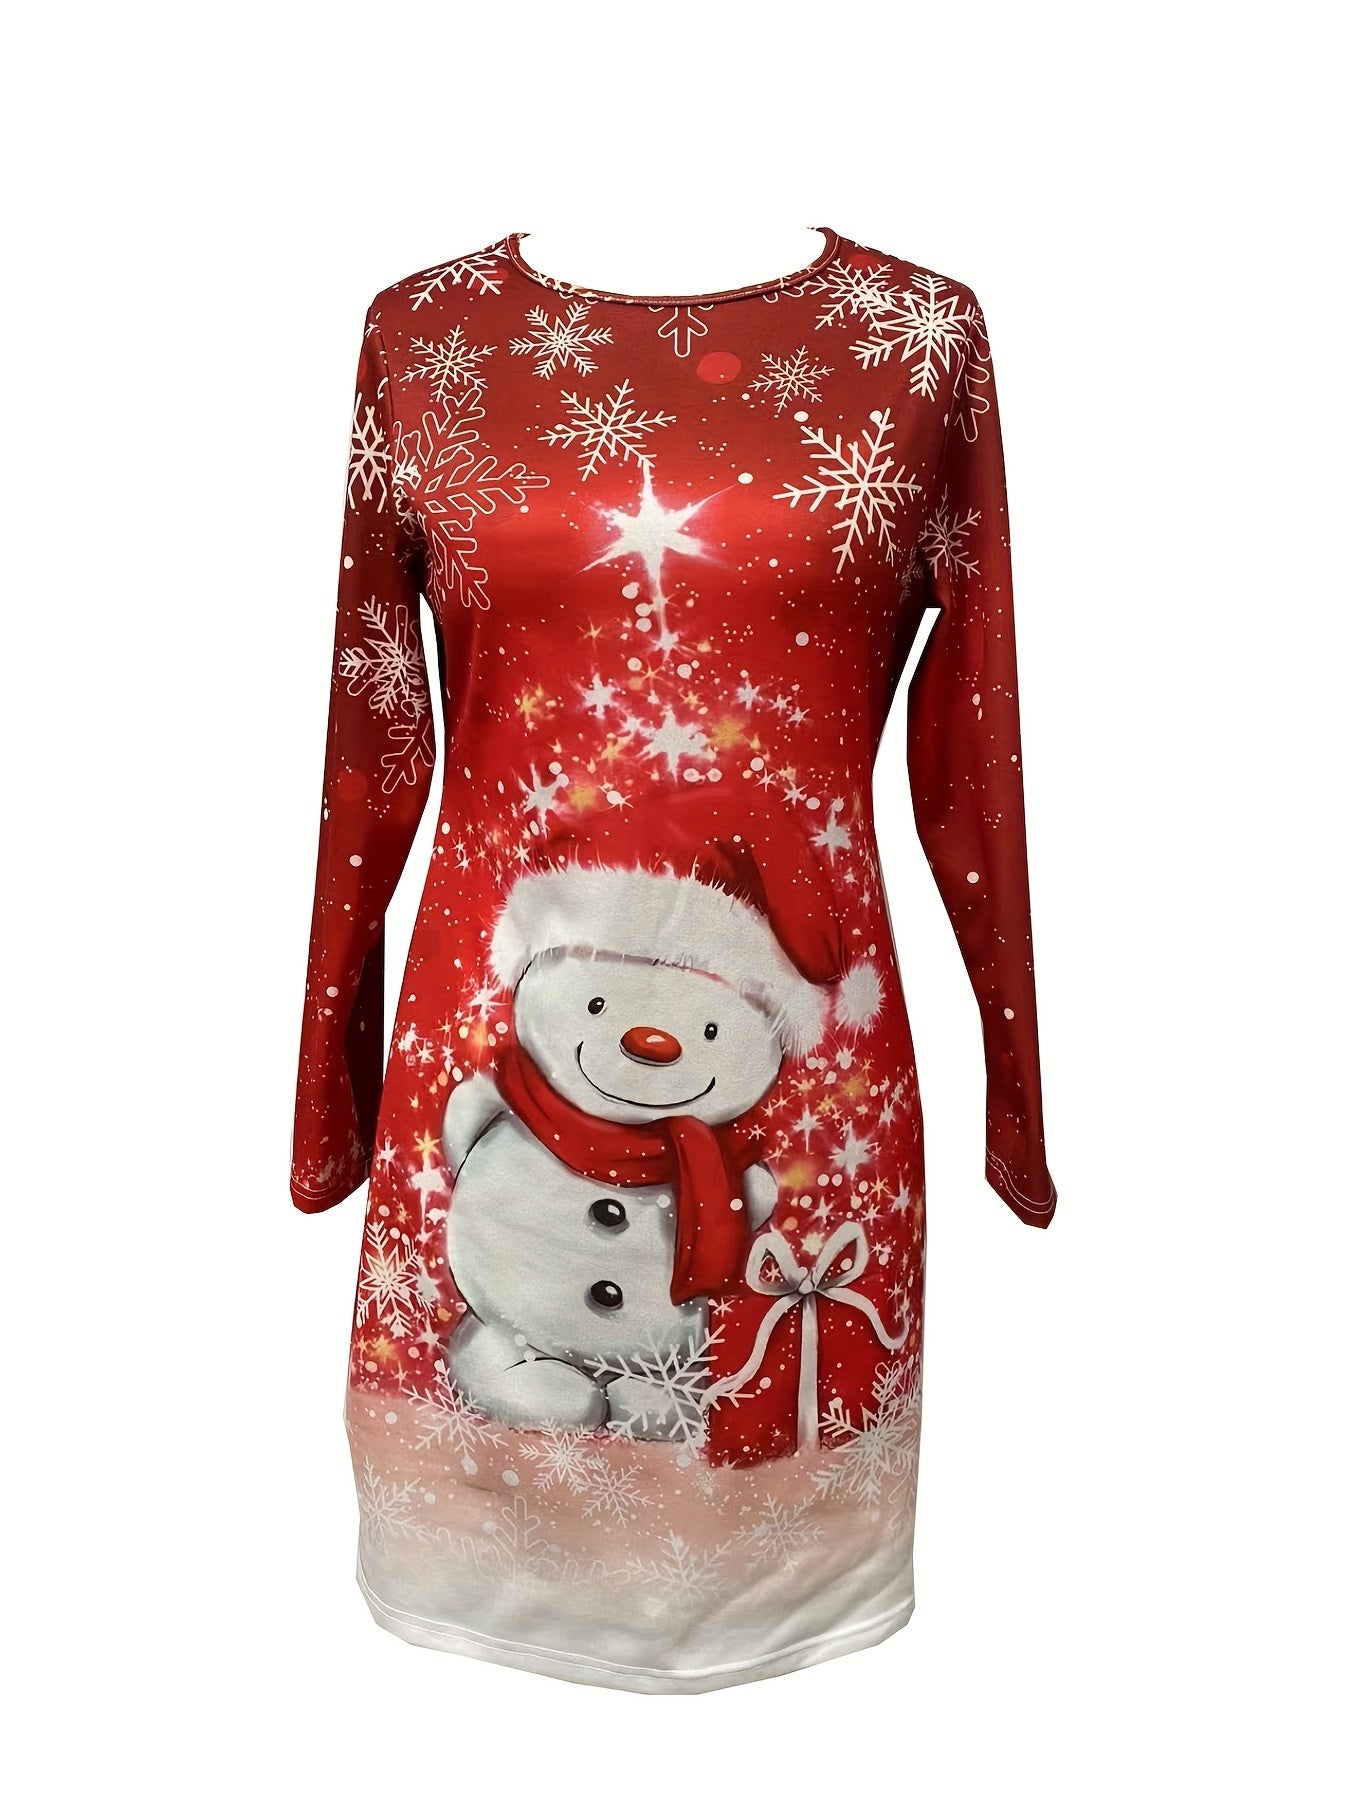 Snowman Print Long Sleeve Dress, Casual Crew Neck Dress For Spring & Fall, Women's Clothing